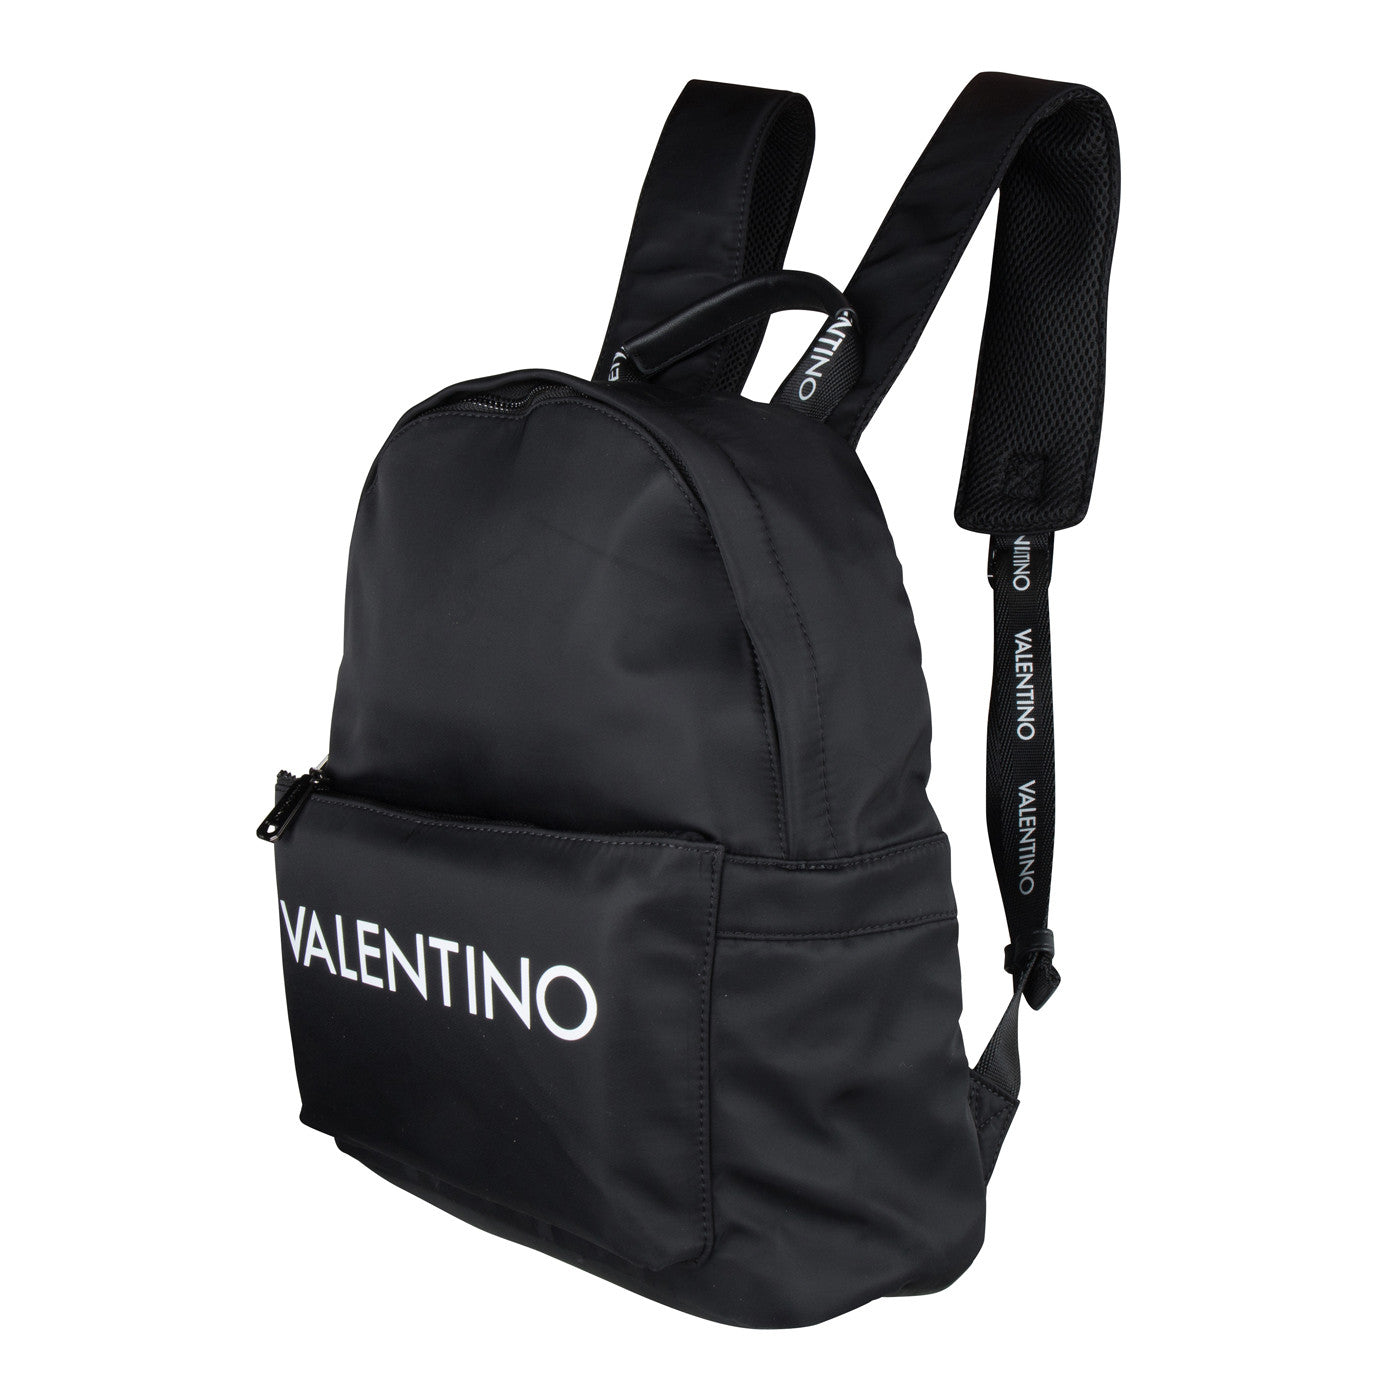 Valentino Bags Kylo Small Man Bag in Black